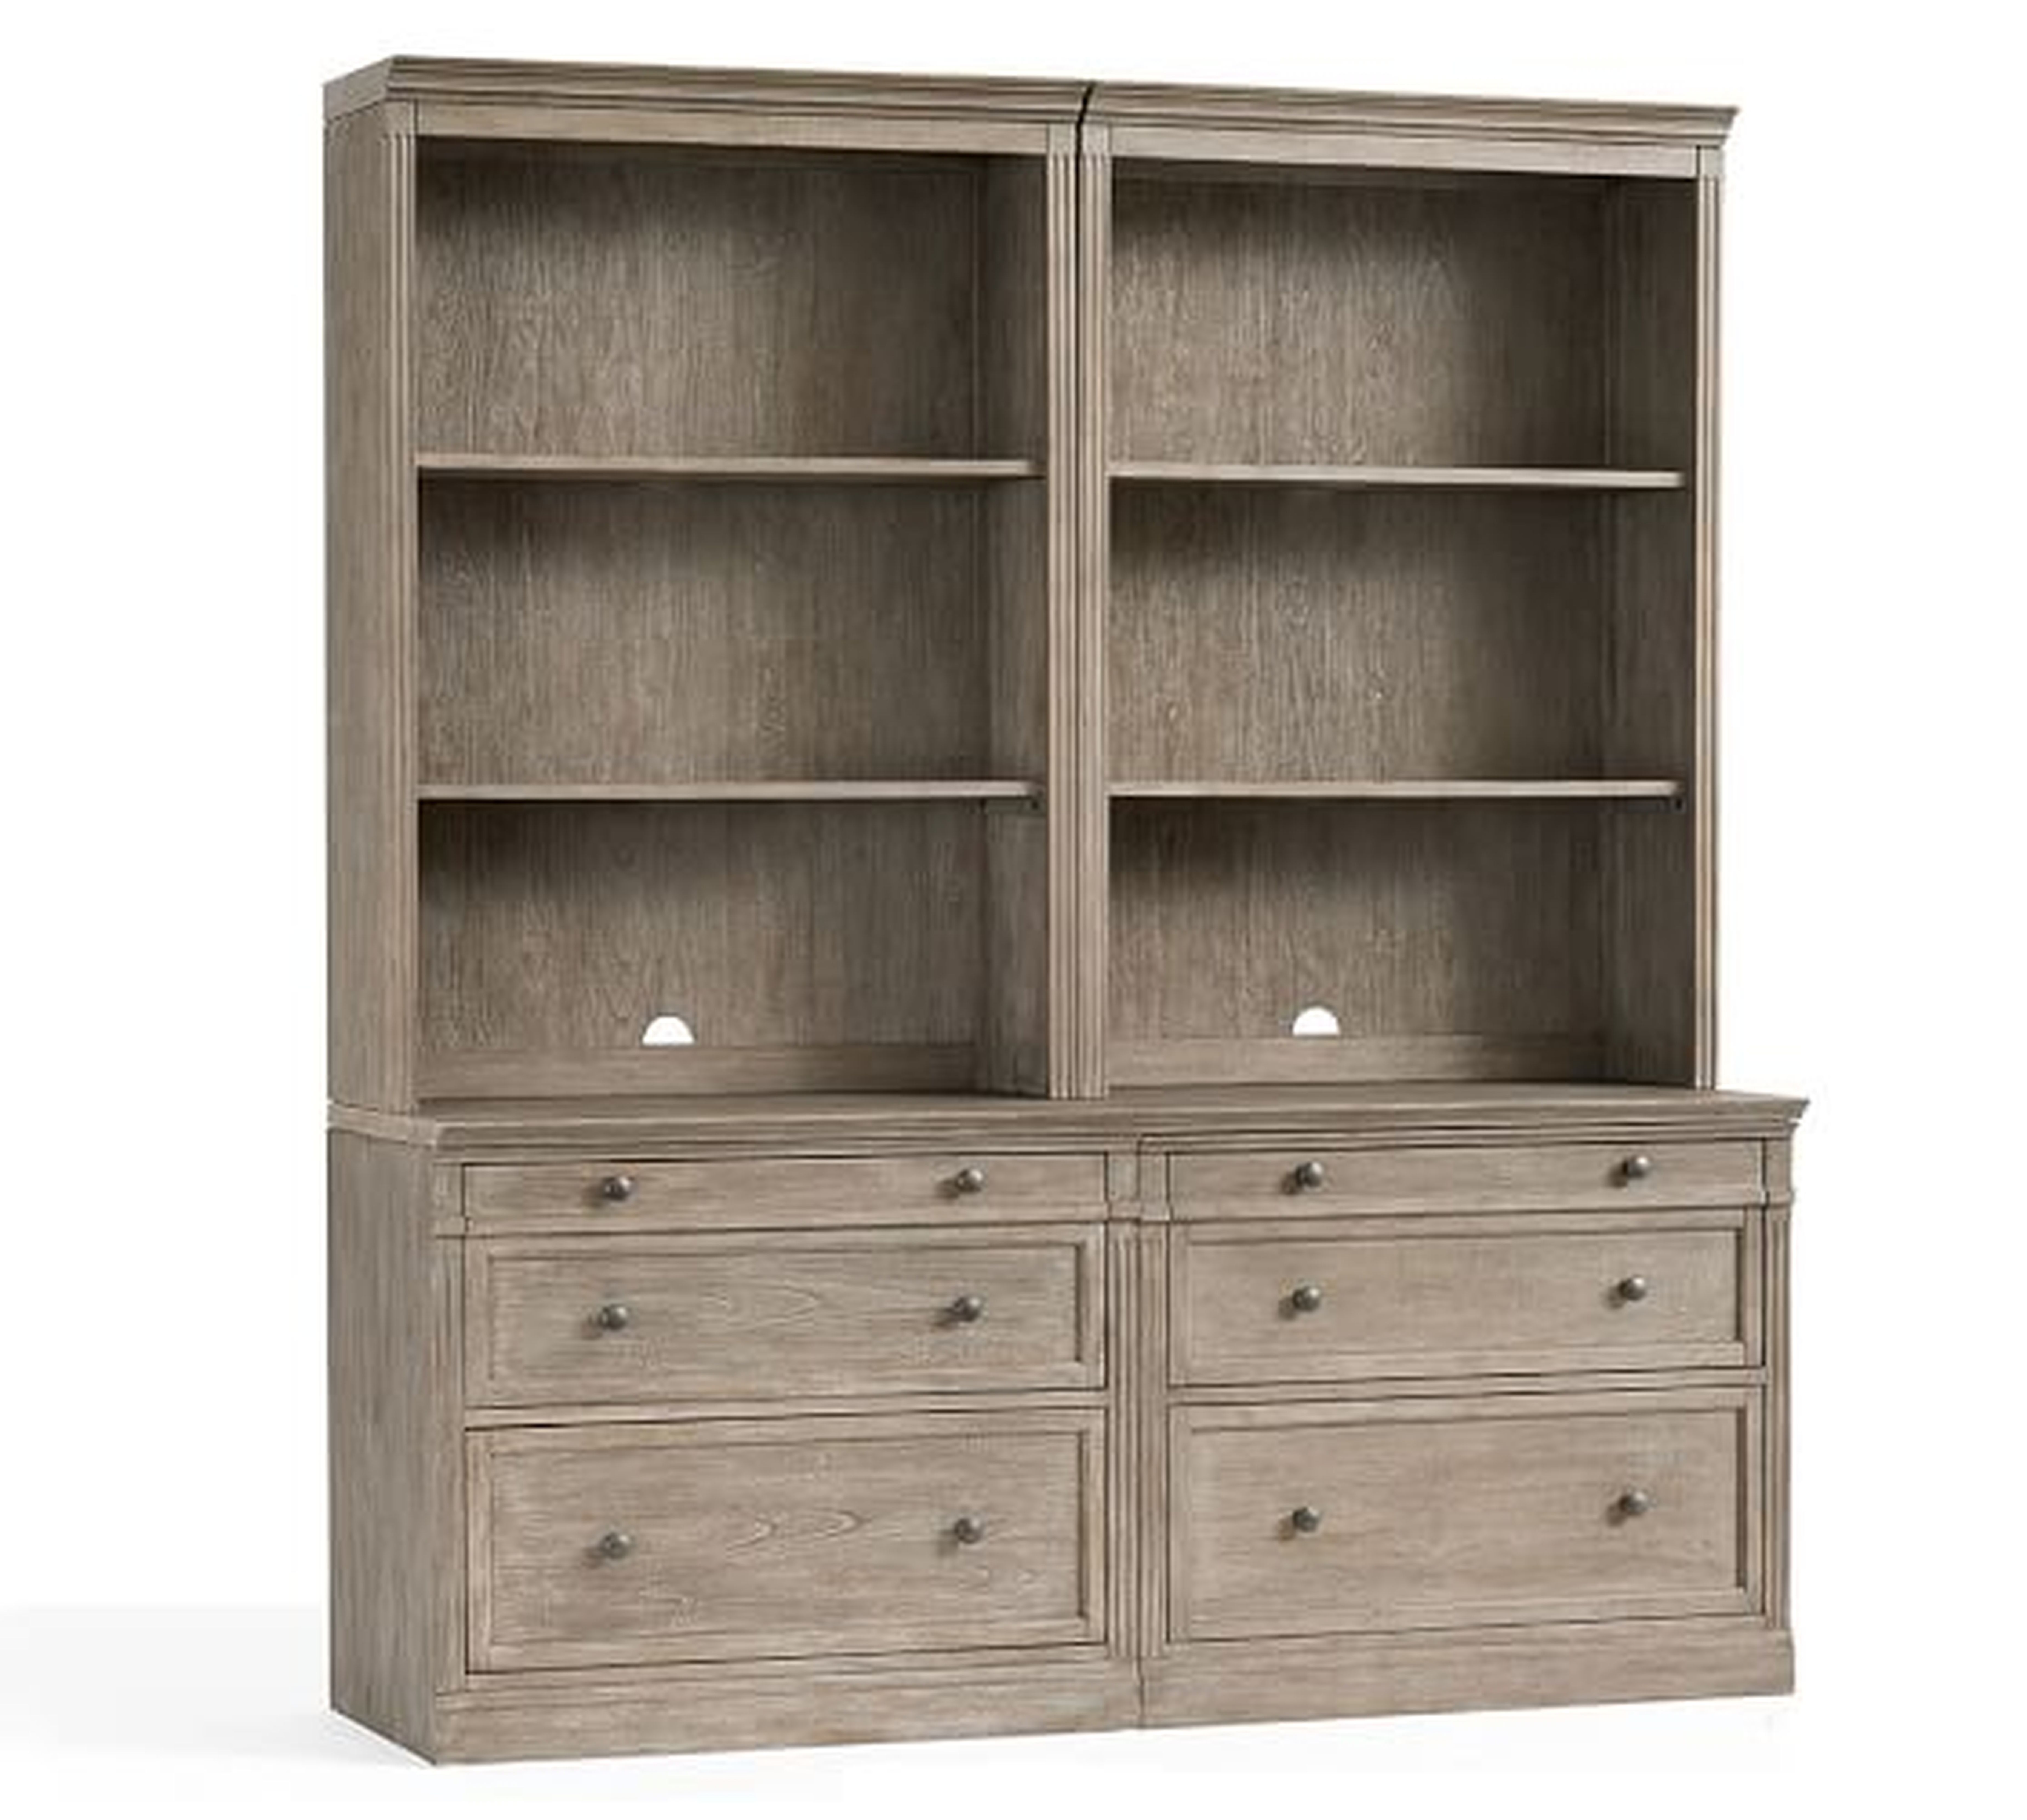 Livingston Double Bookcase With File Cabinets, Gray Wash - Pottery Barn